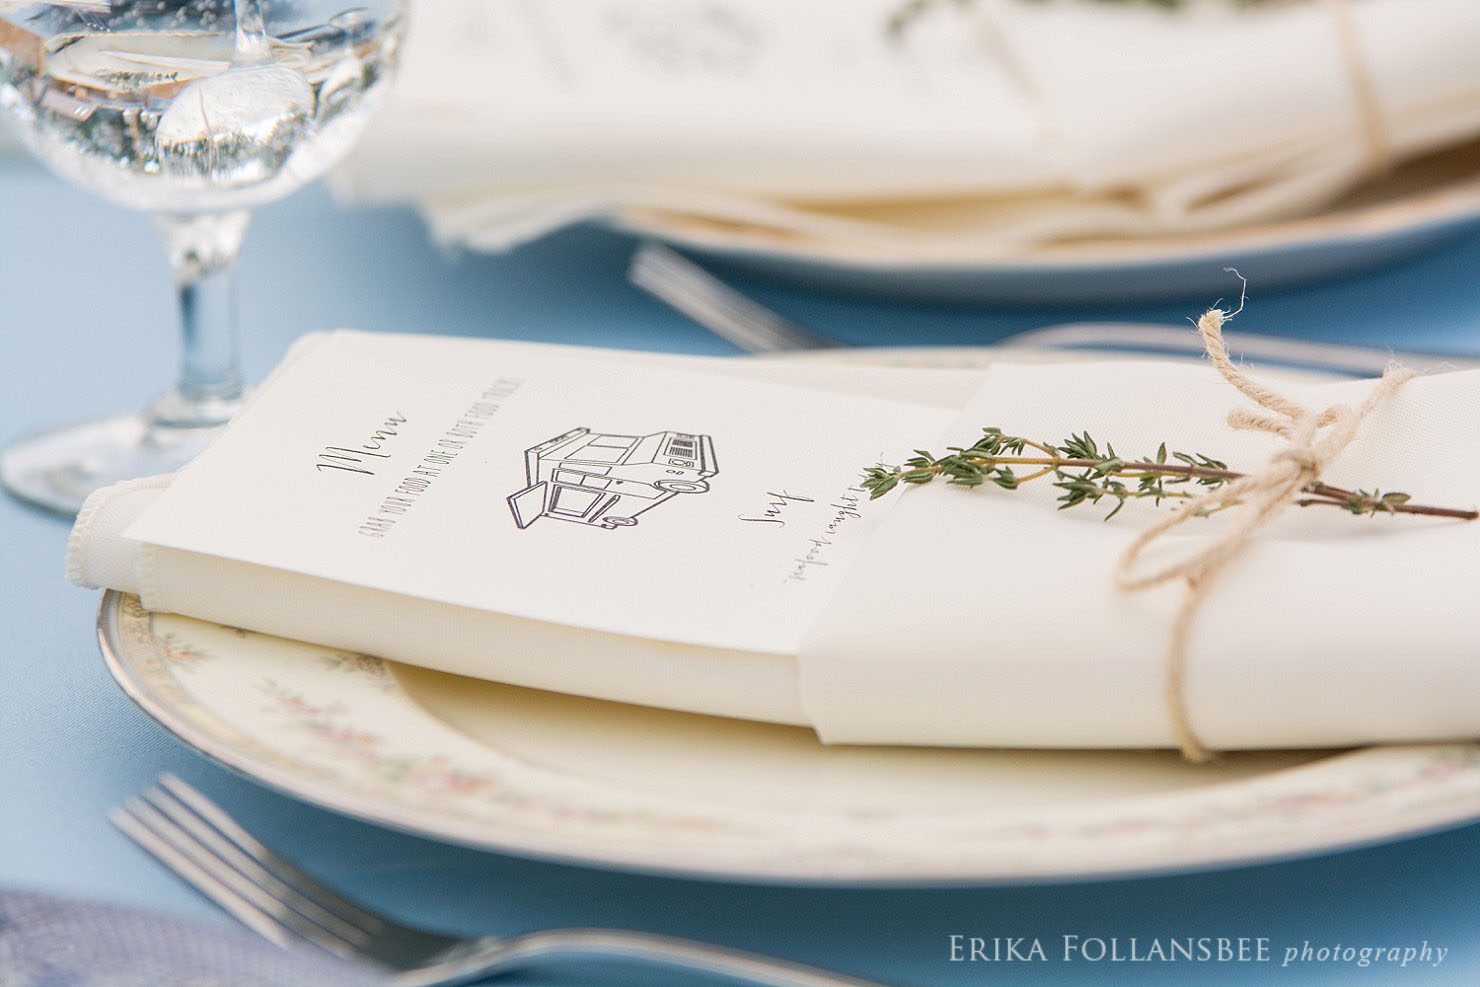 wedding menu tucked into napkin tied with twine and a sprig of thyme